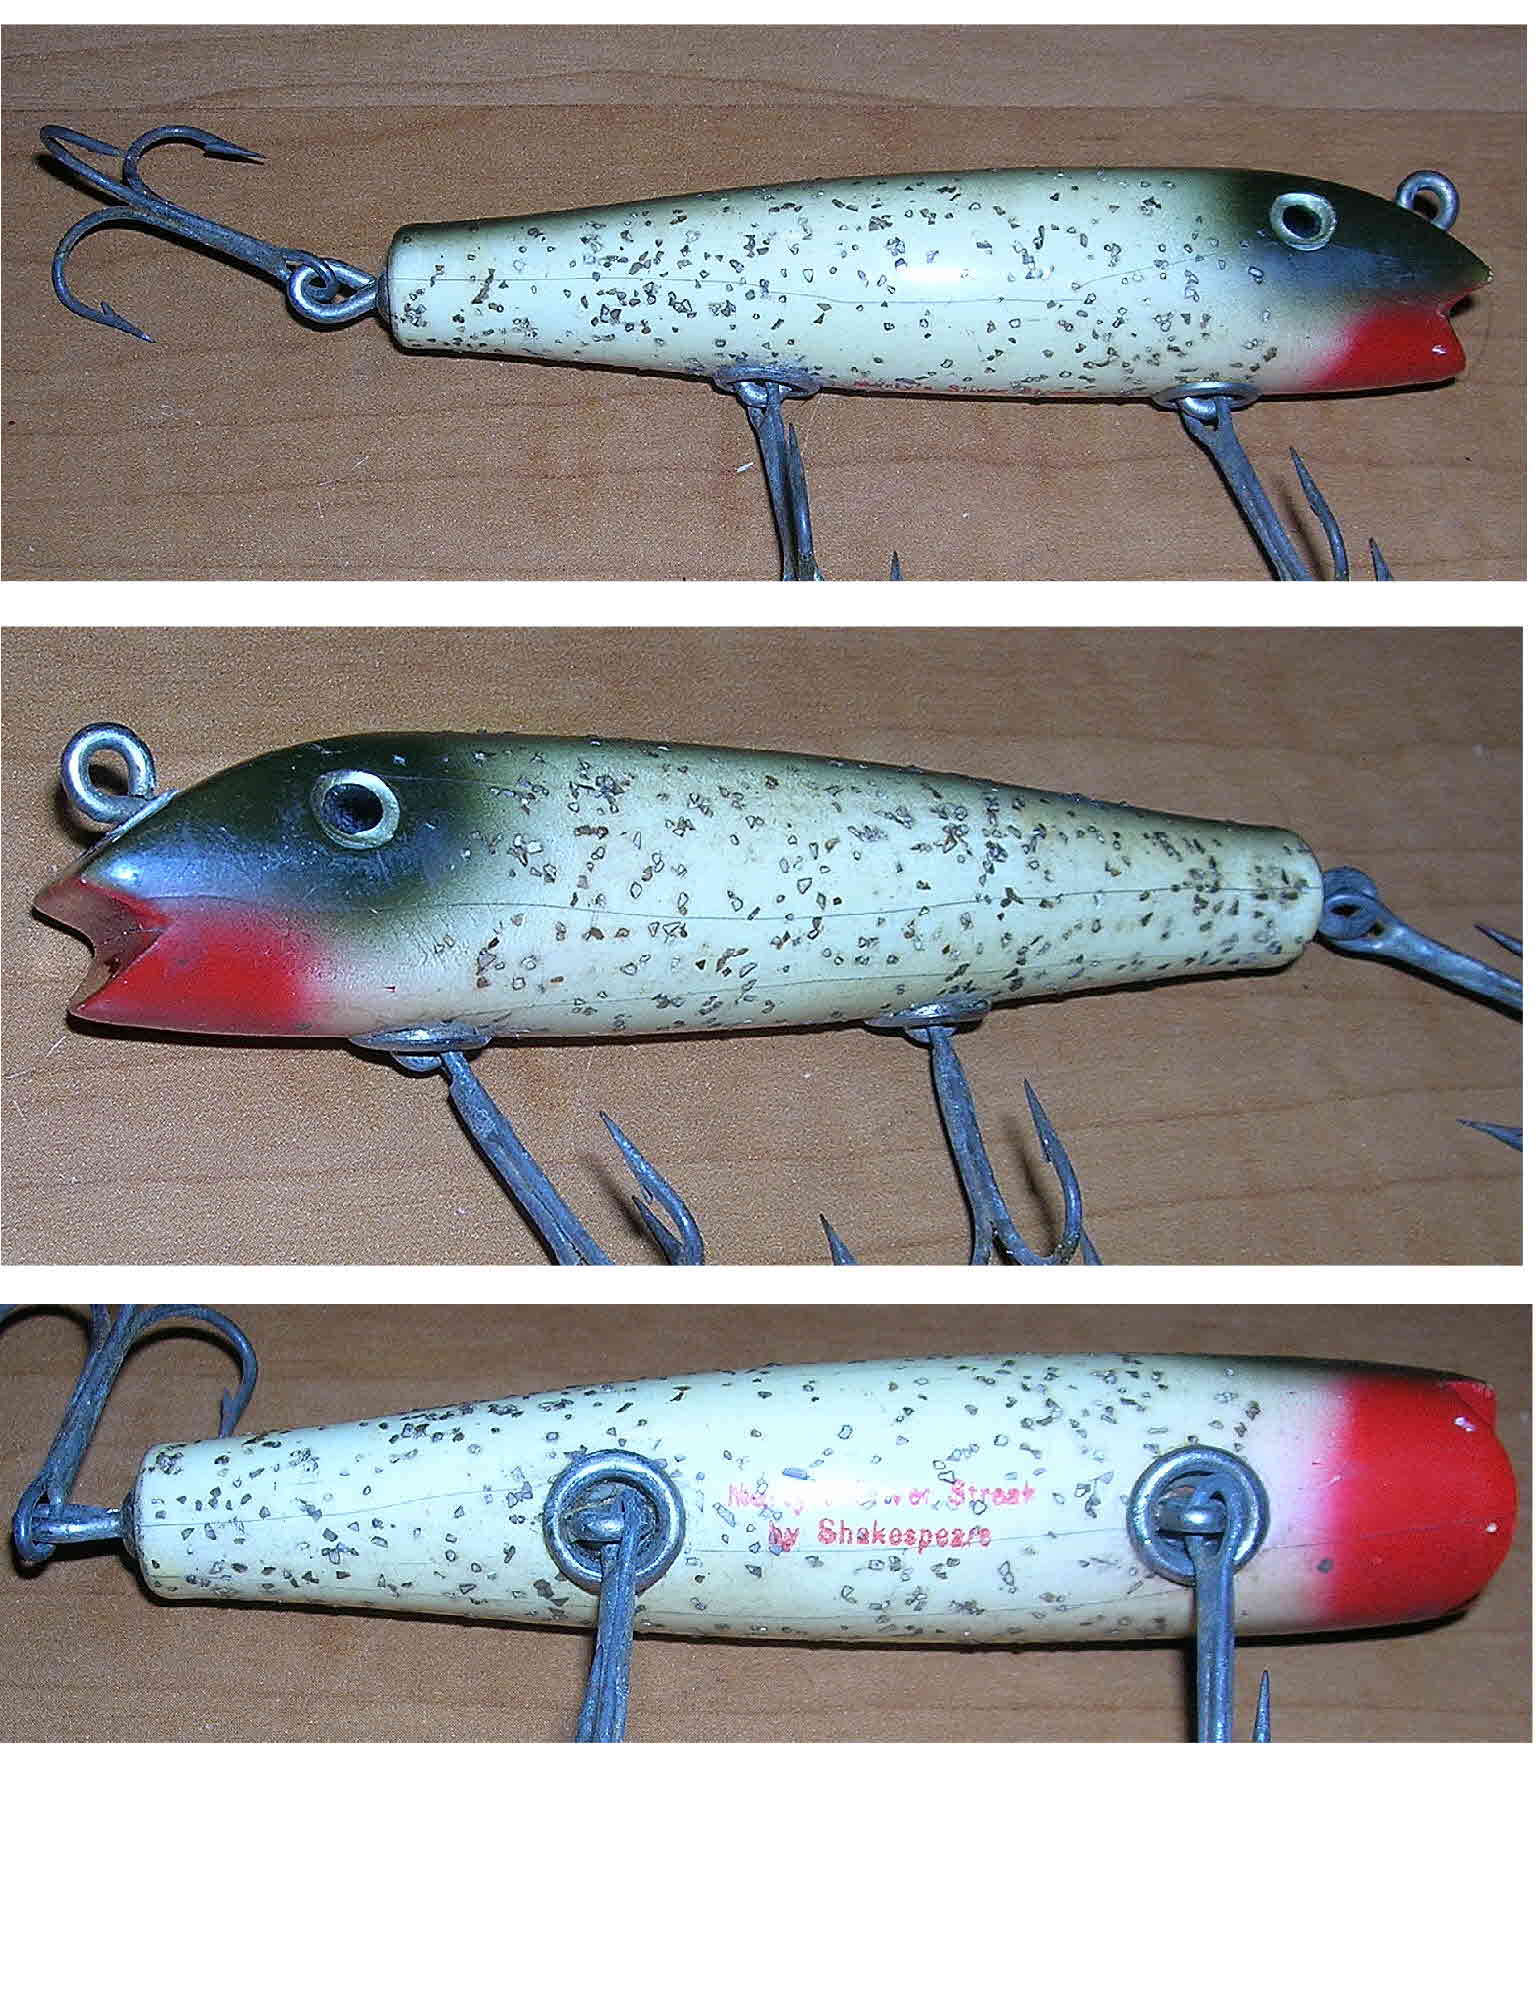 Vintage Fishing Lures Pike Lures Swim Whizz, Bomber Lures Lot/8